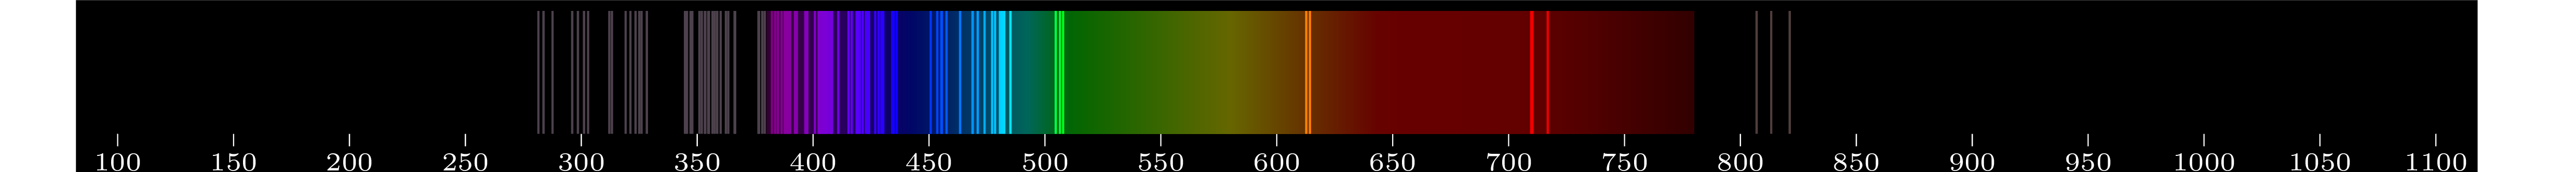 emmision spectra of element Zr